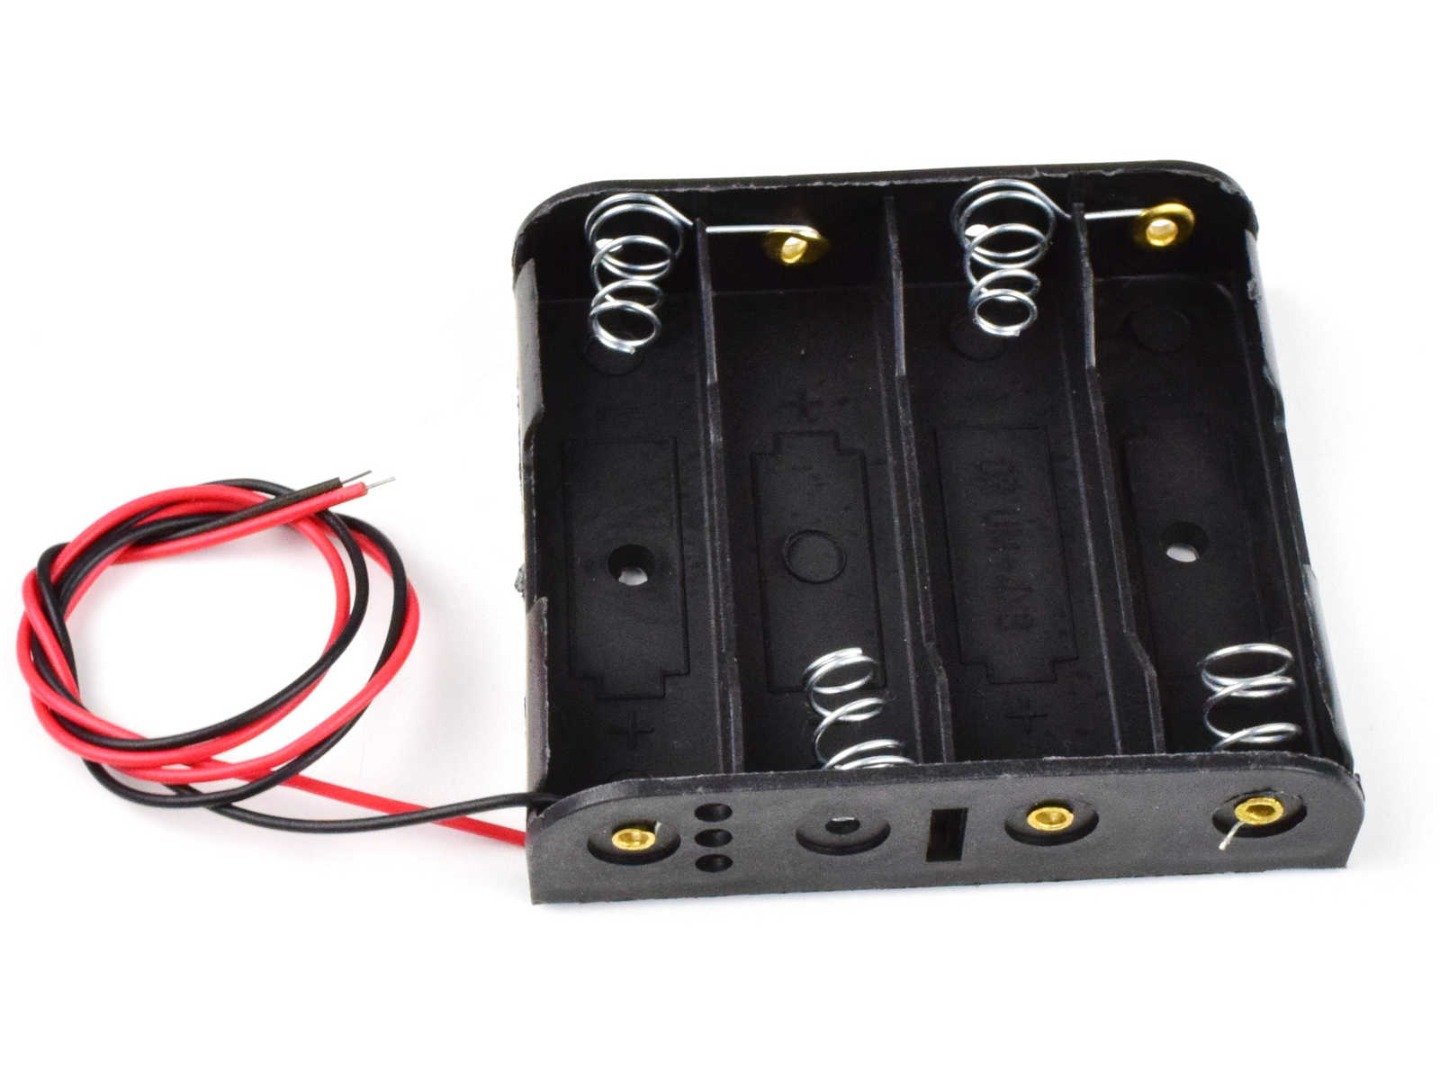 Battery Box Holder for 4x AA 1.5V Batteries, 25cm wires, open ends 4